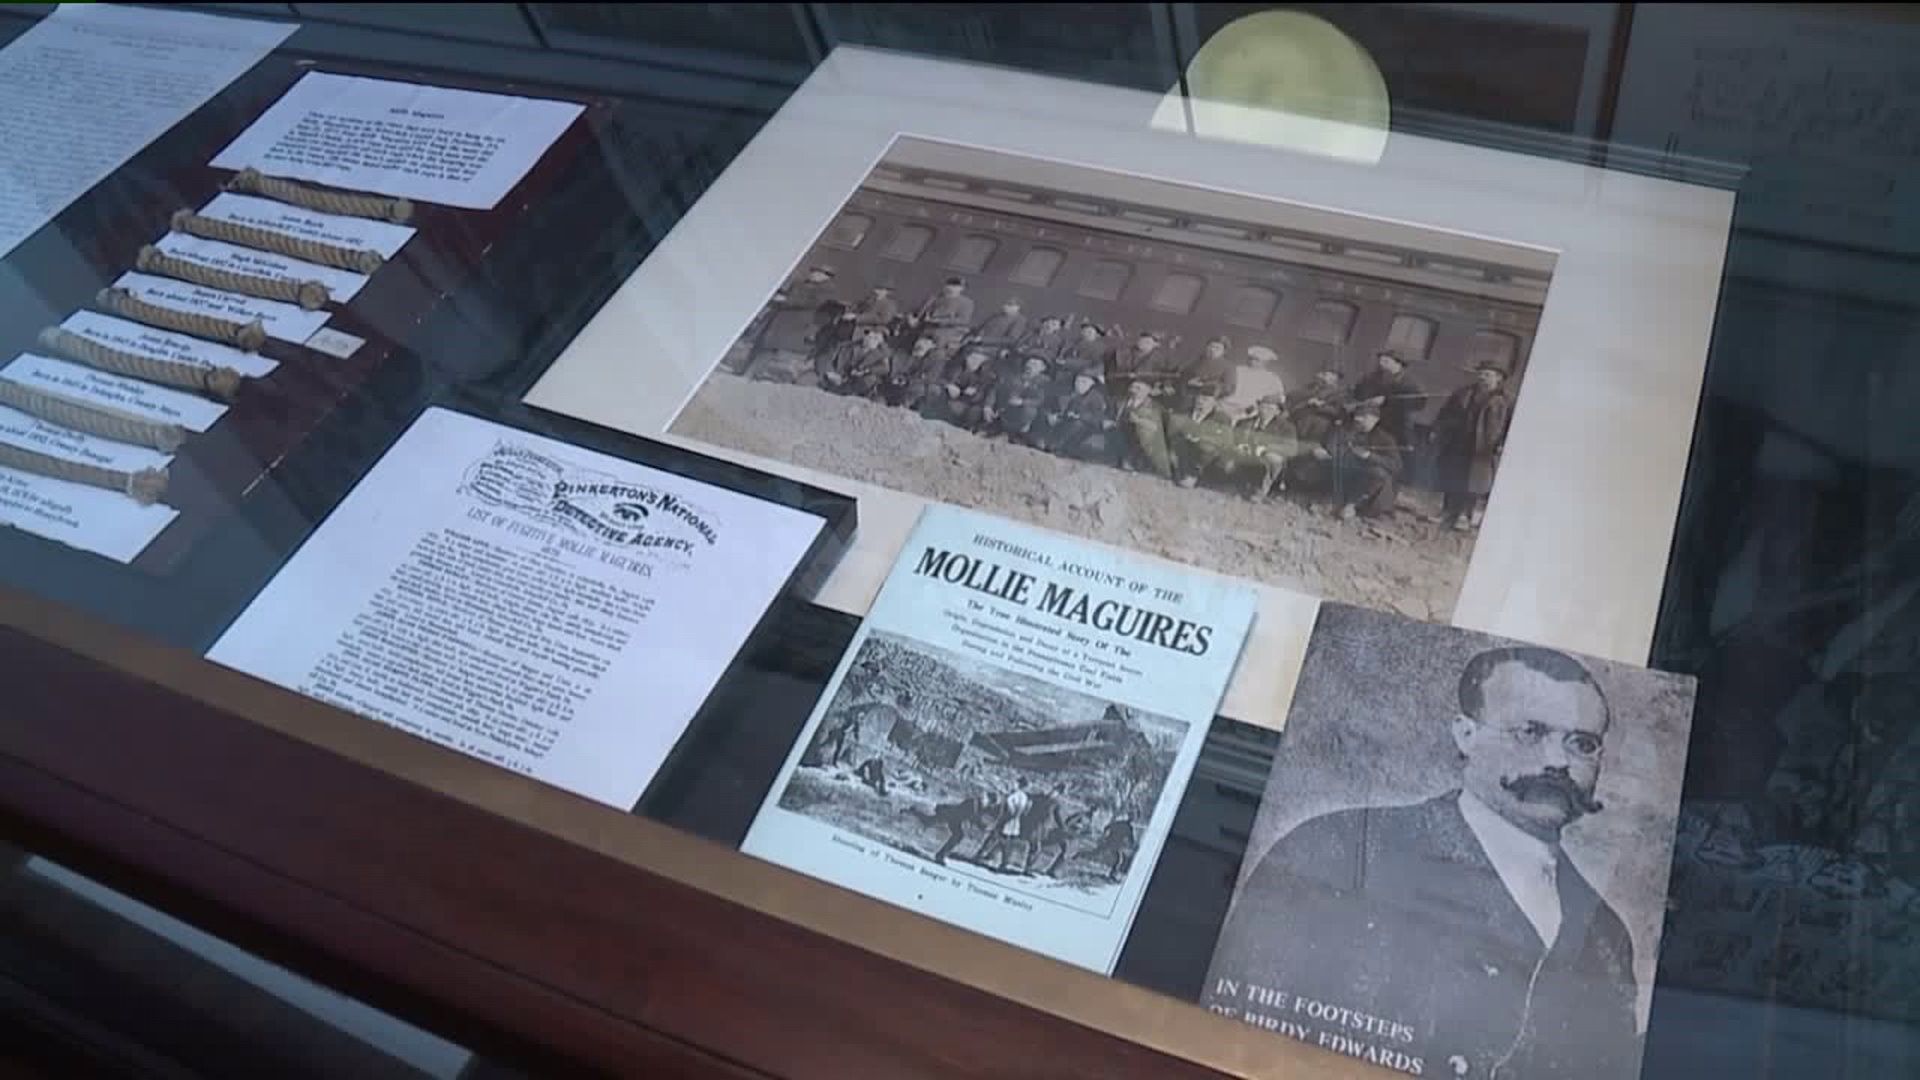 Schuylkill County Historical Society Video Seeks Donations